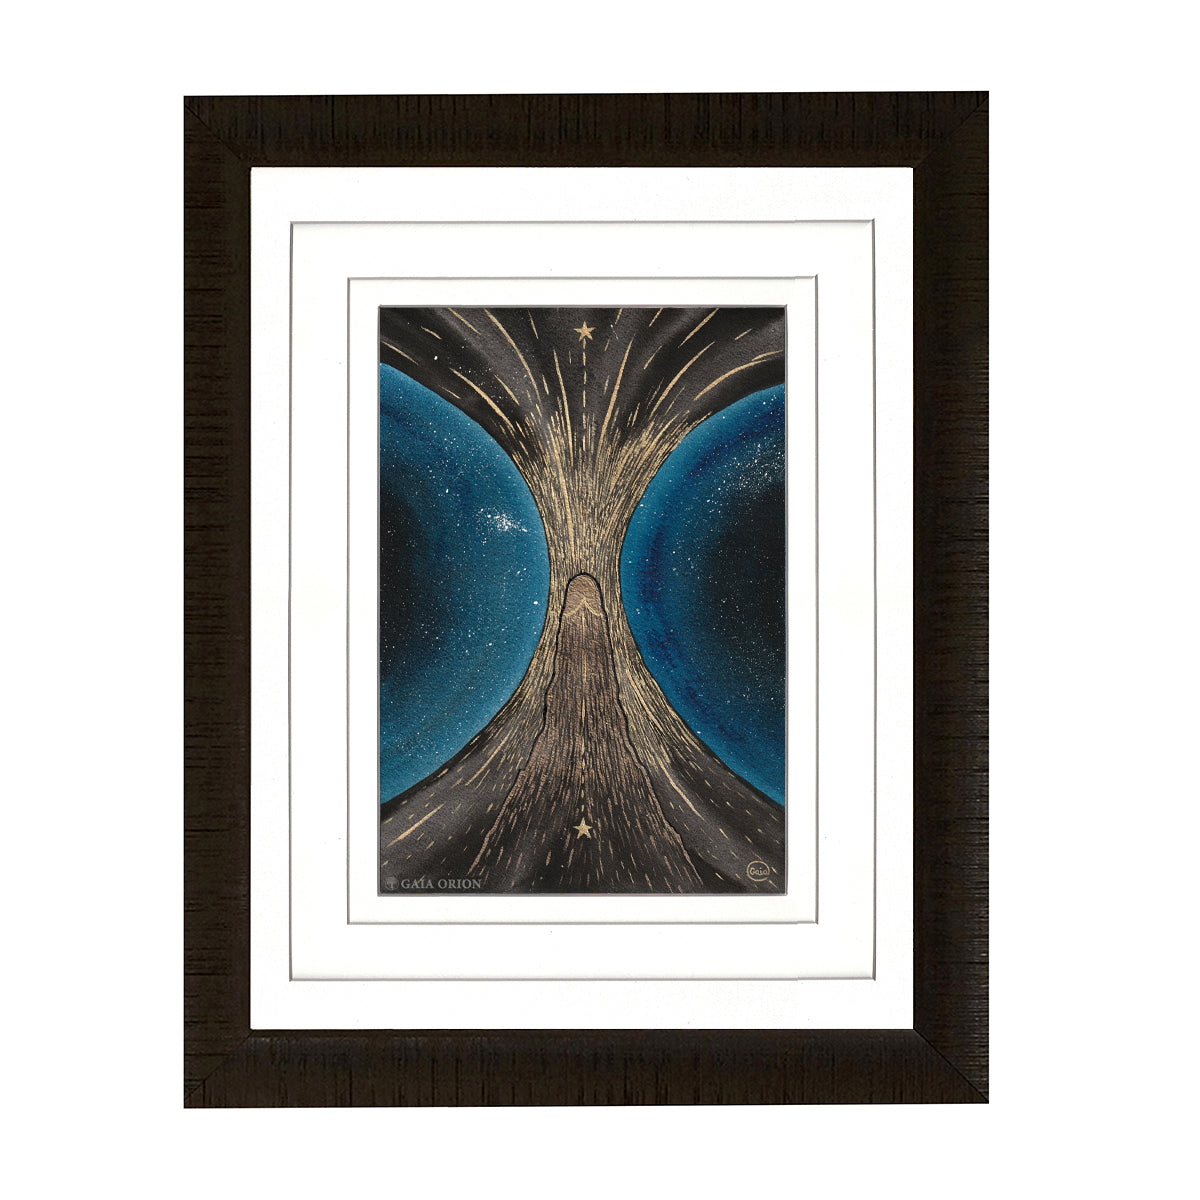 Framed painting of a lingam sacred sexuality connected to cosmic energies